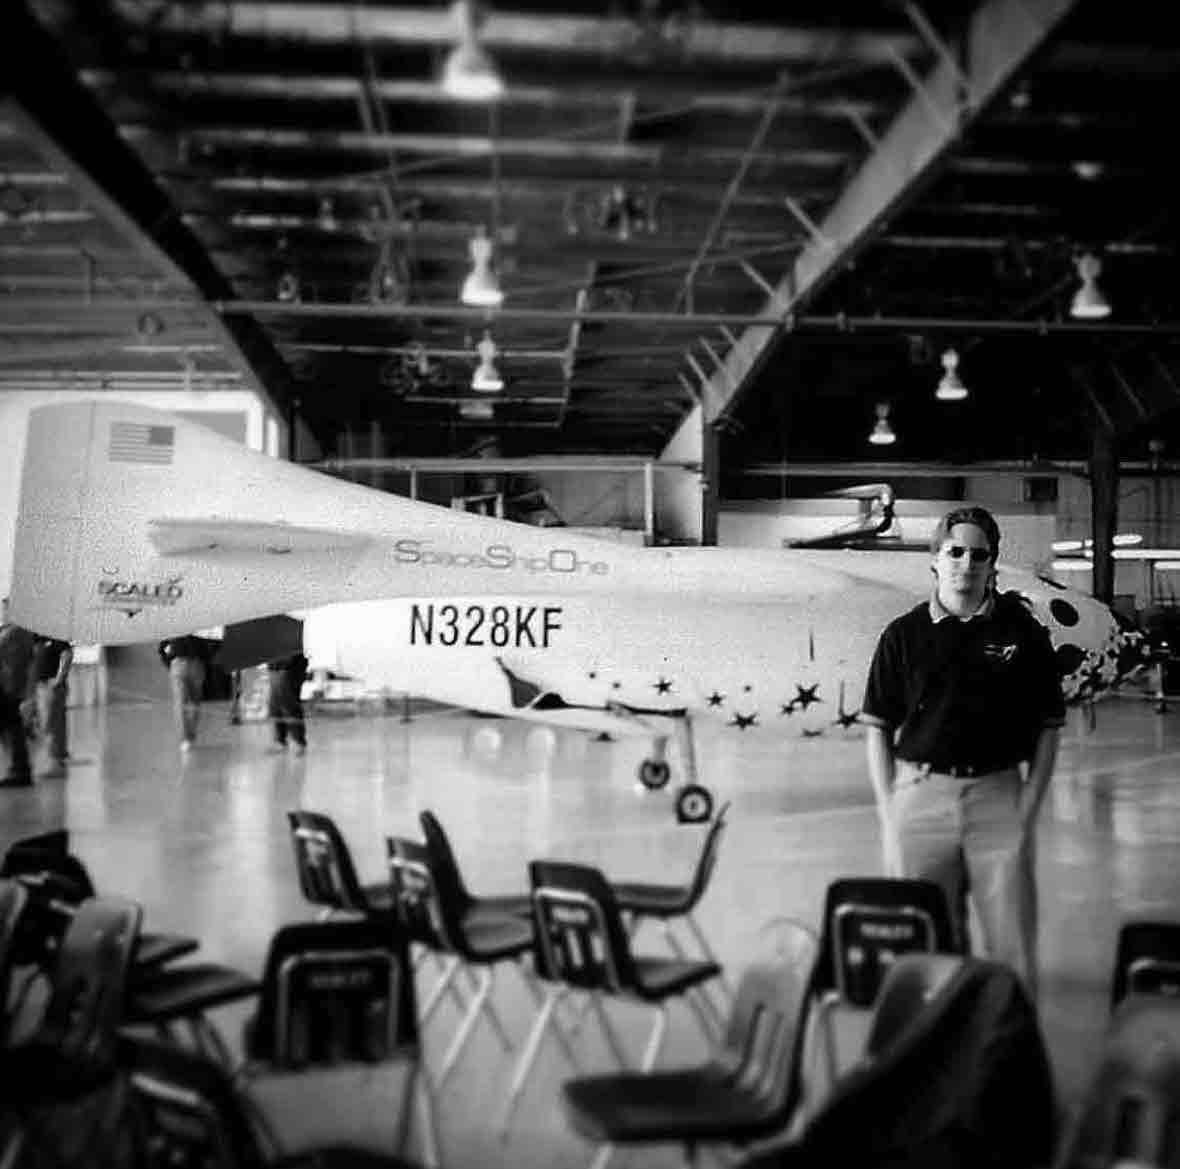 Me with SSO at the Scaled Composites main hanger.